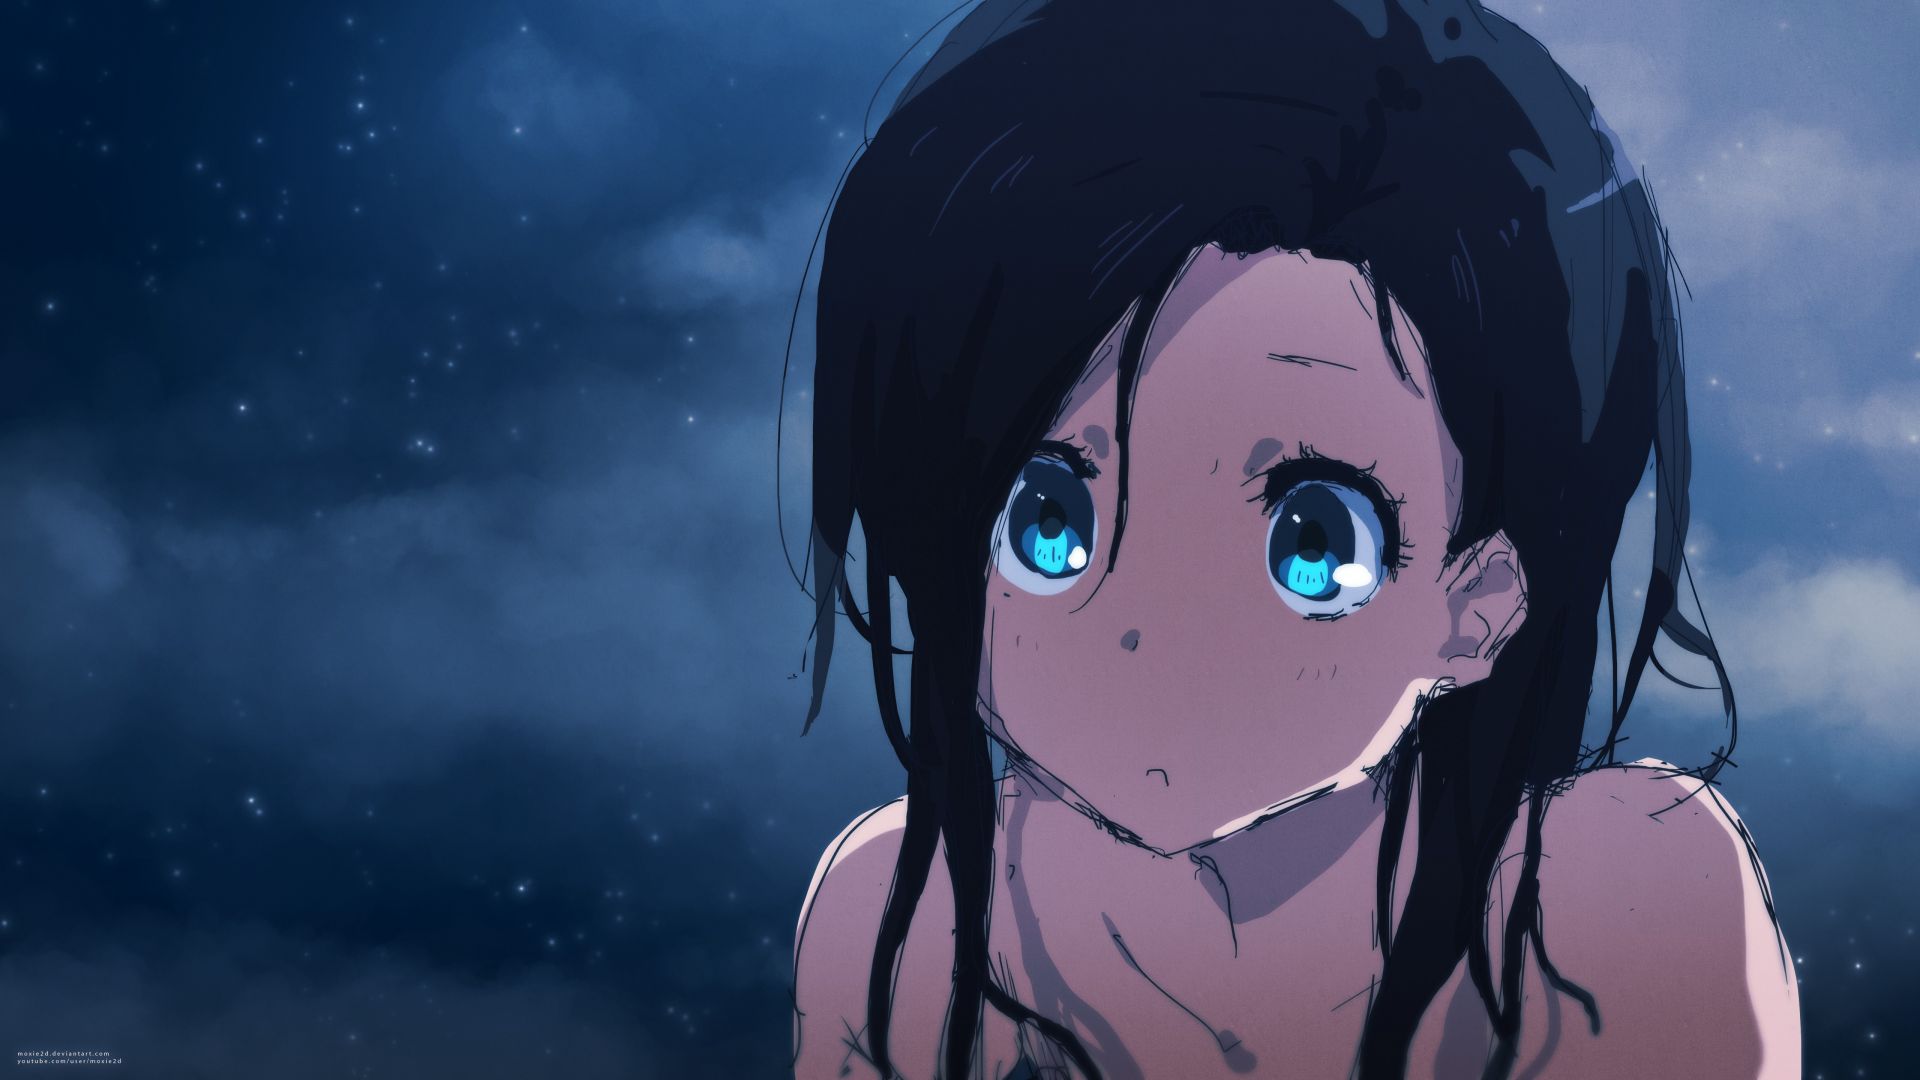 Anime girl with blue eyes looking up - Anime girl